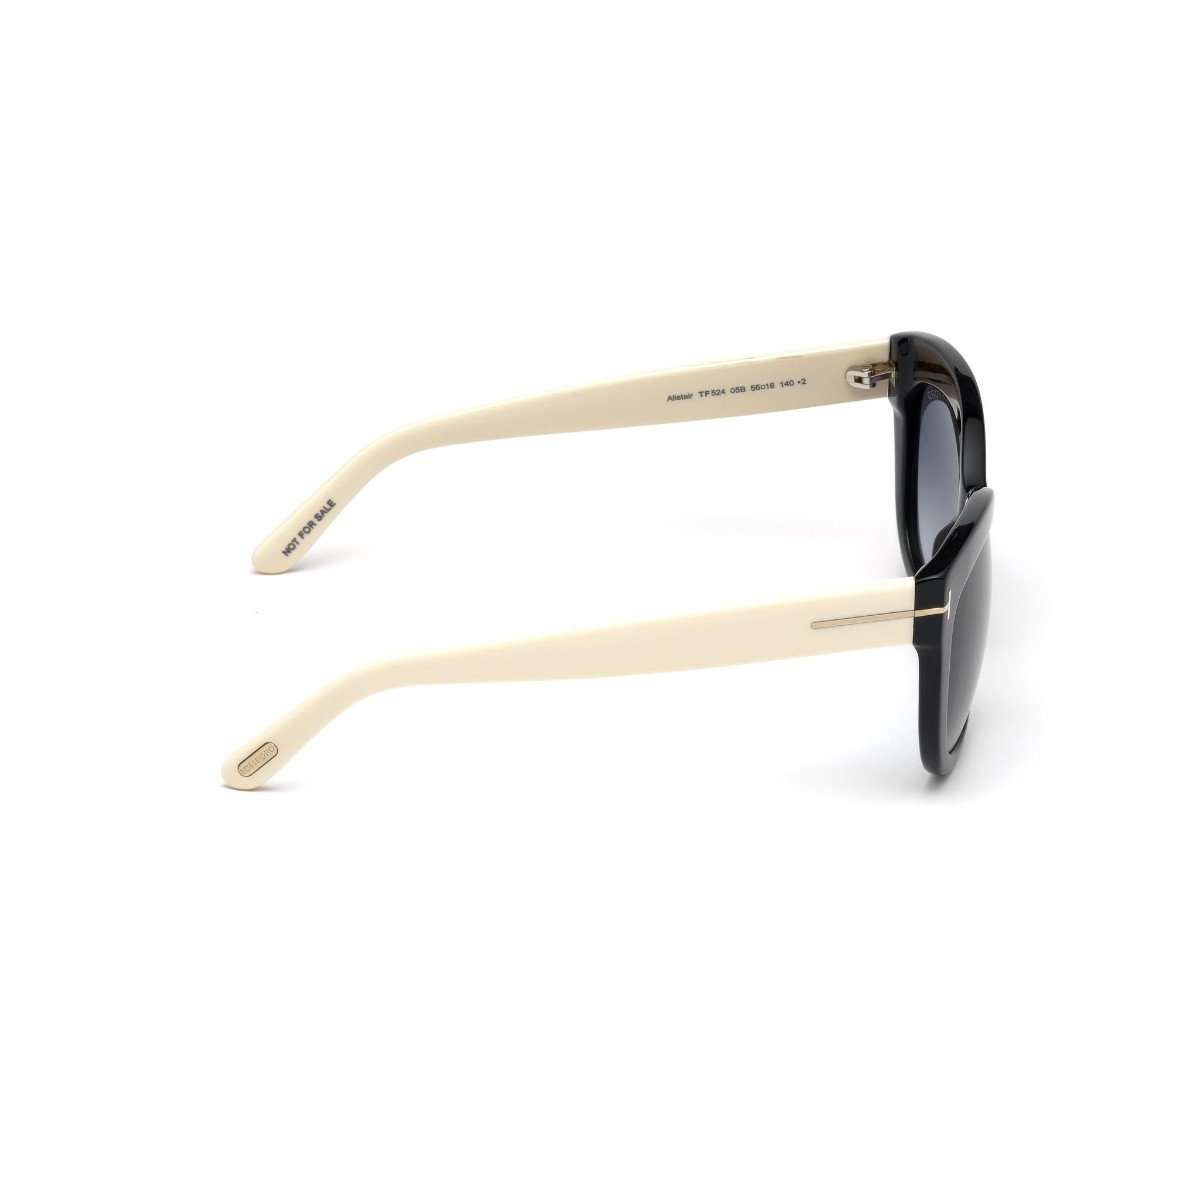 Tom Ford - TF524 05B Black with Beige Temples